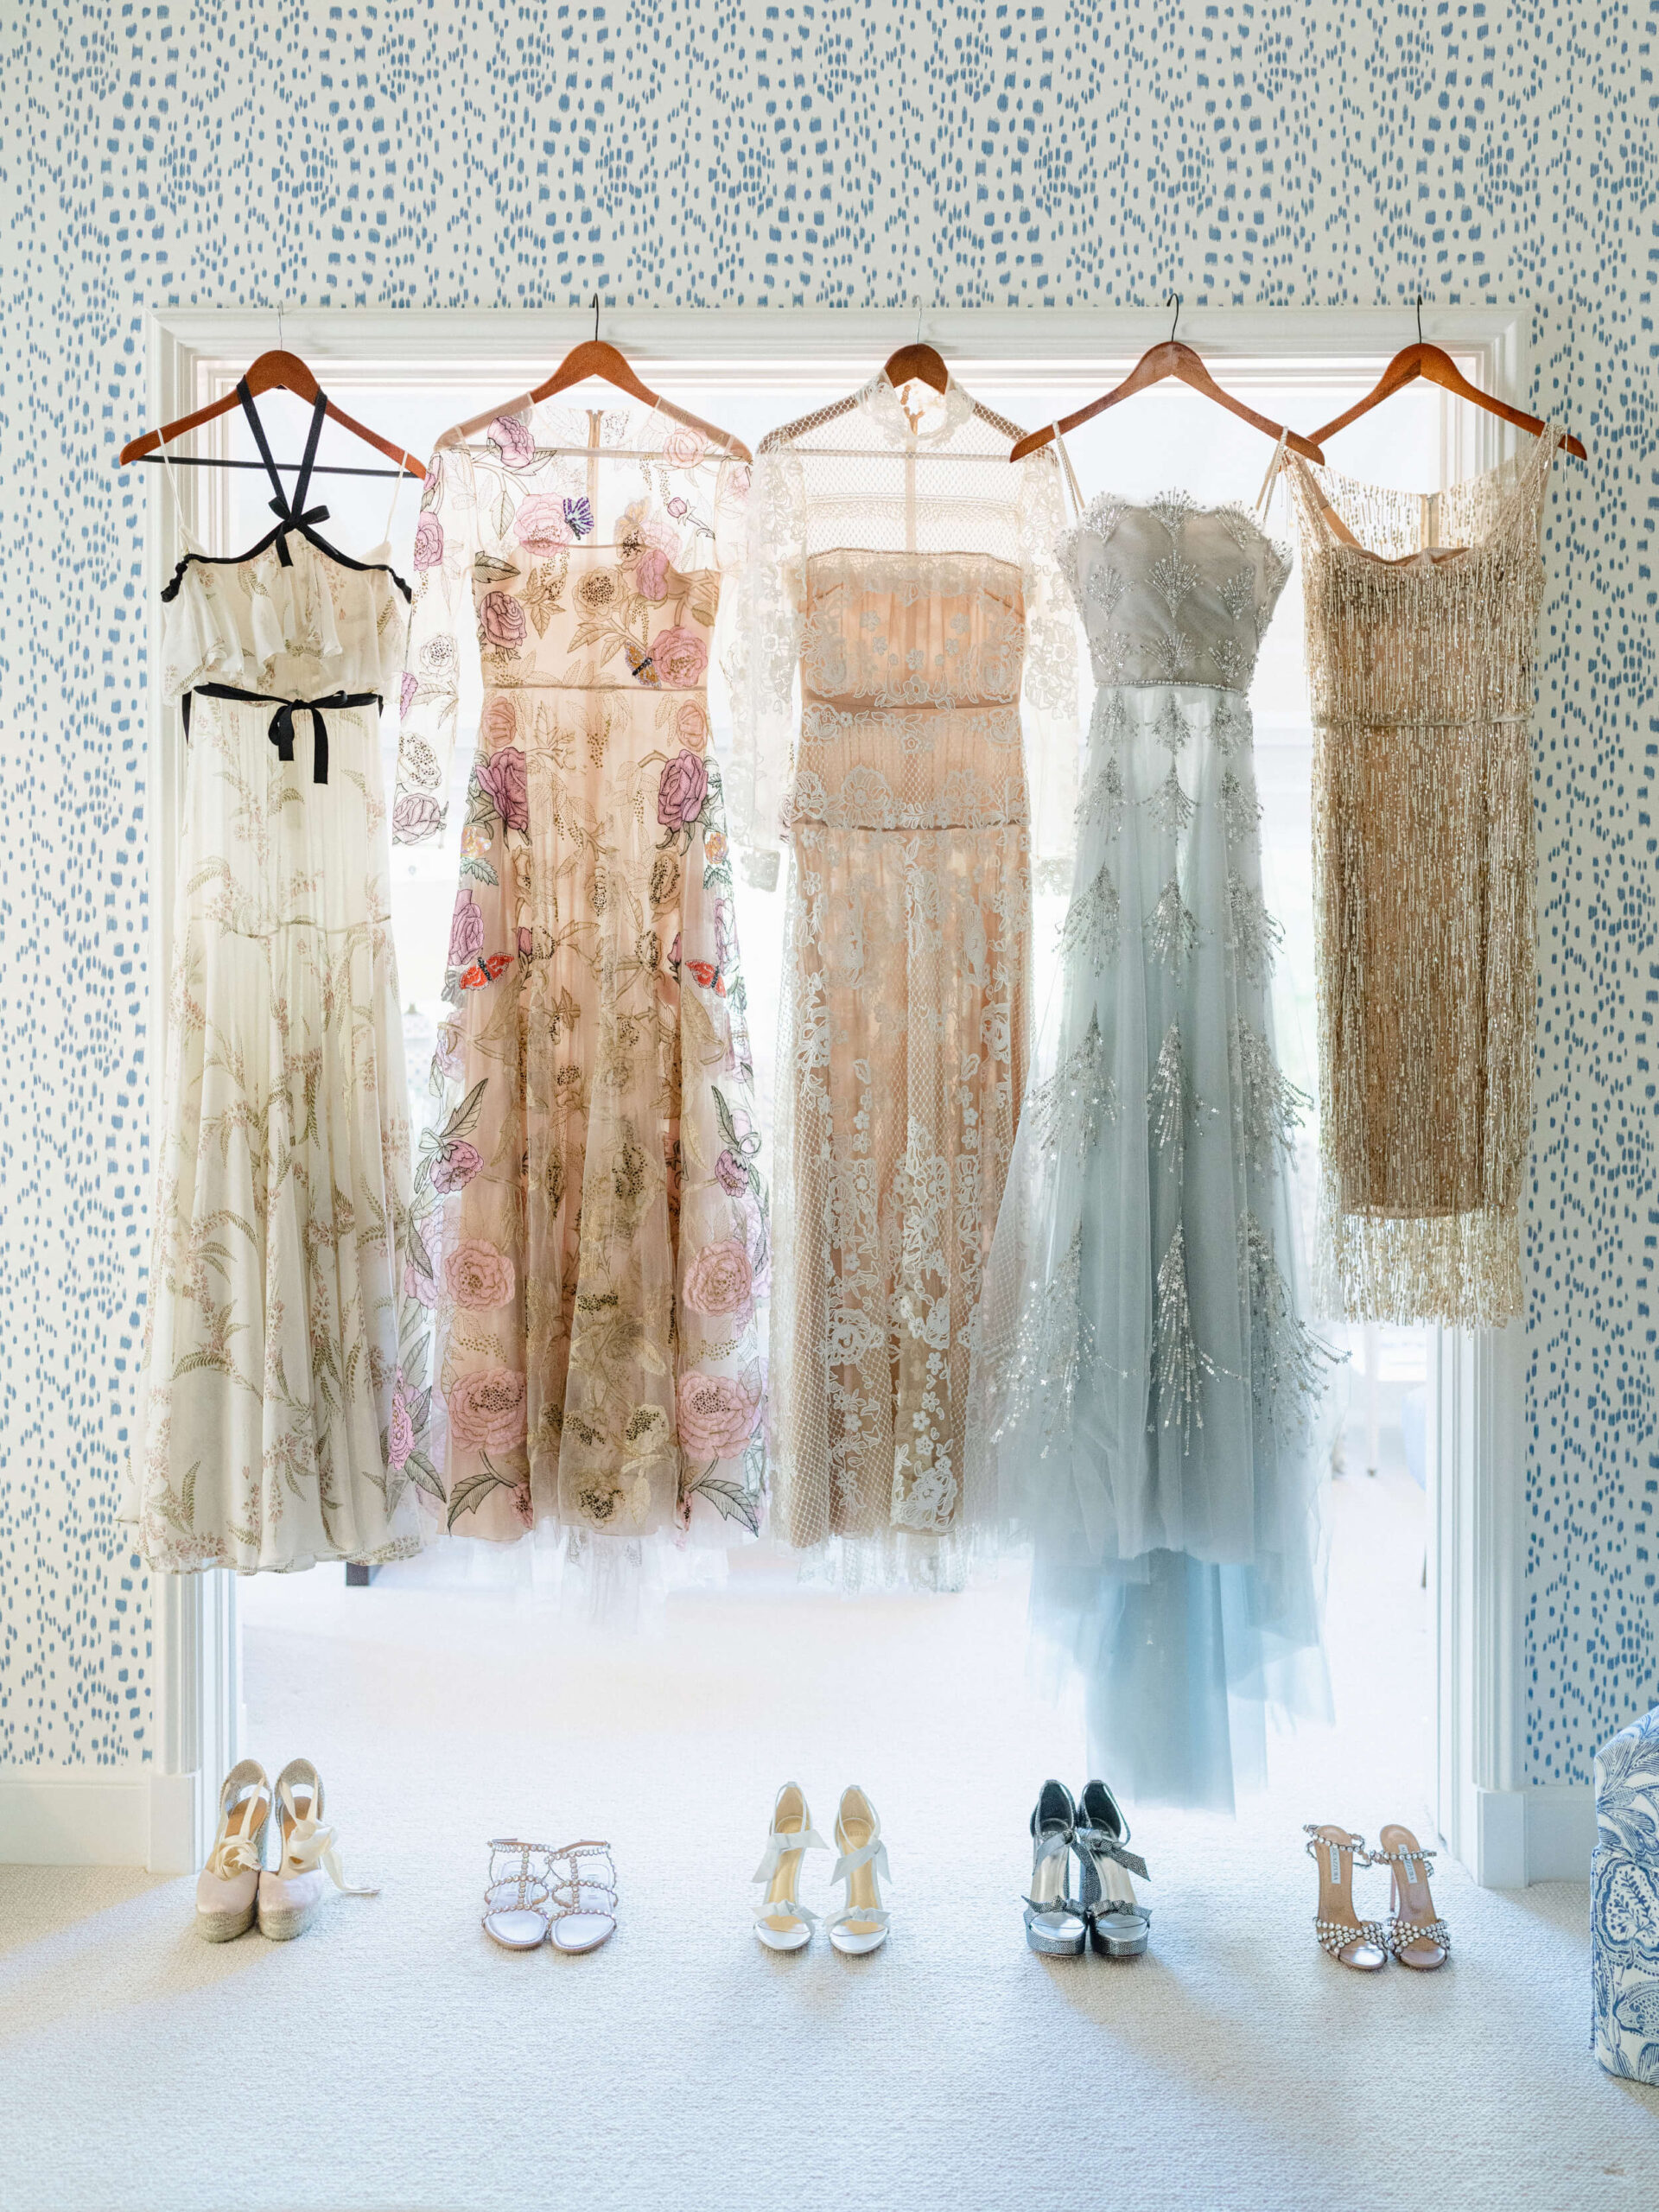 Dresses hung up against a bright window